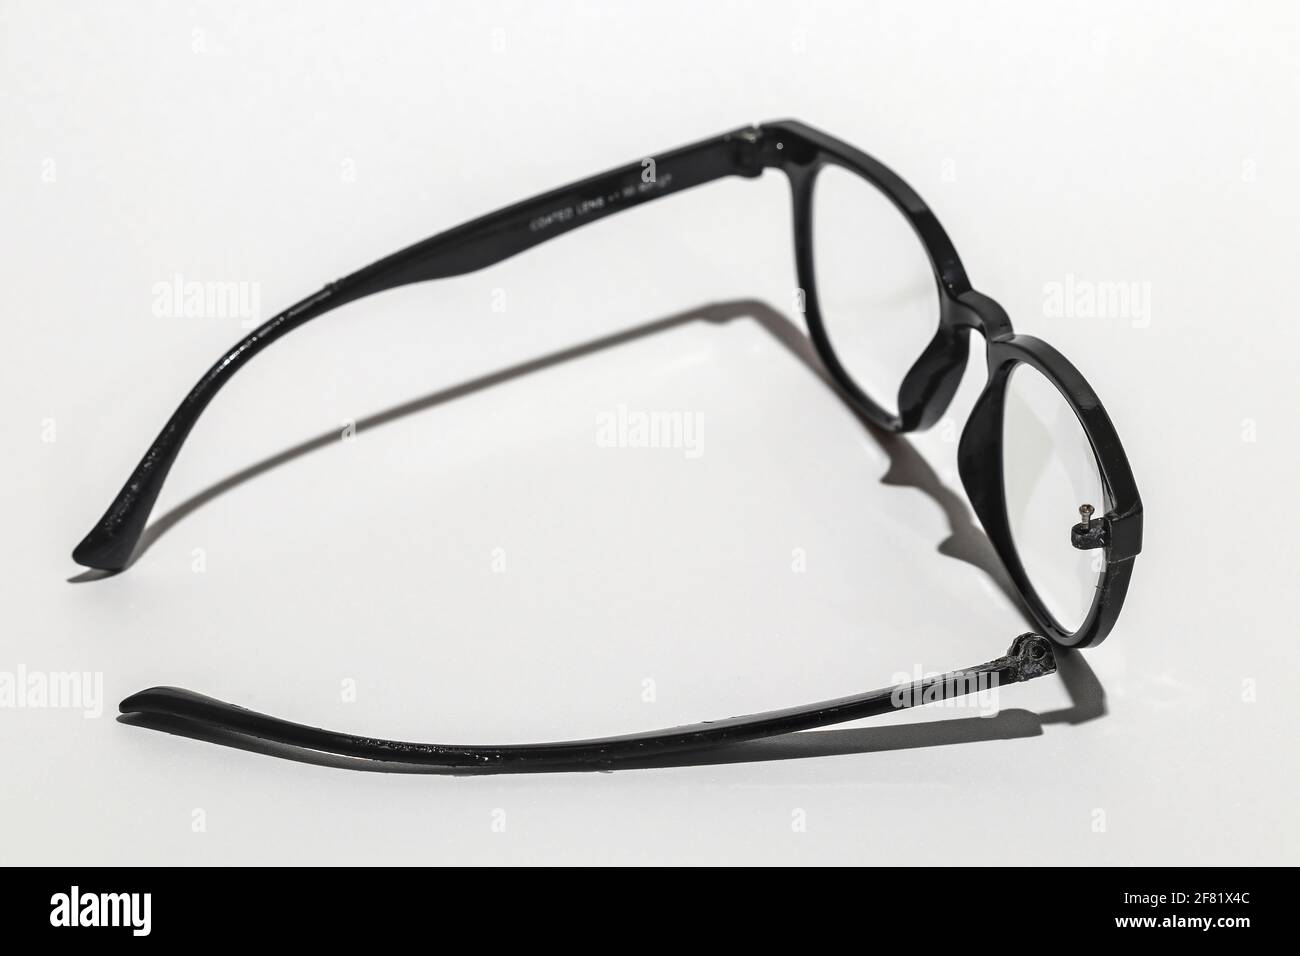 The glasses are damaged, the parts are separated. Stock Photo